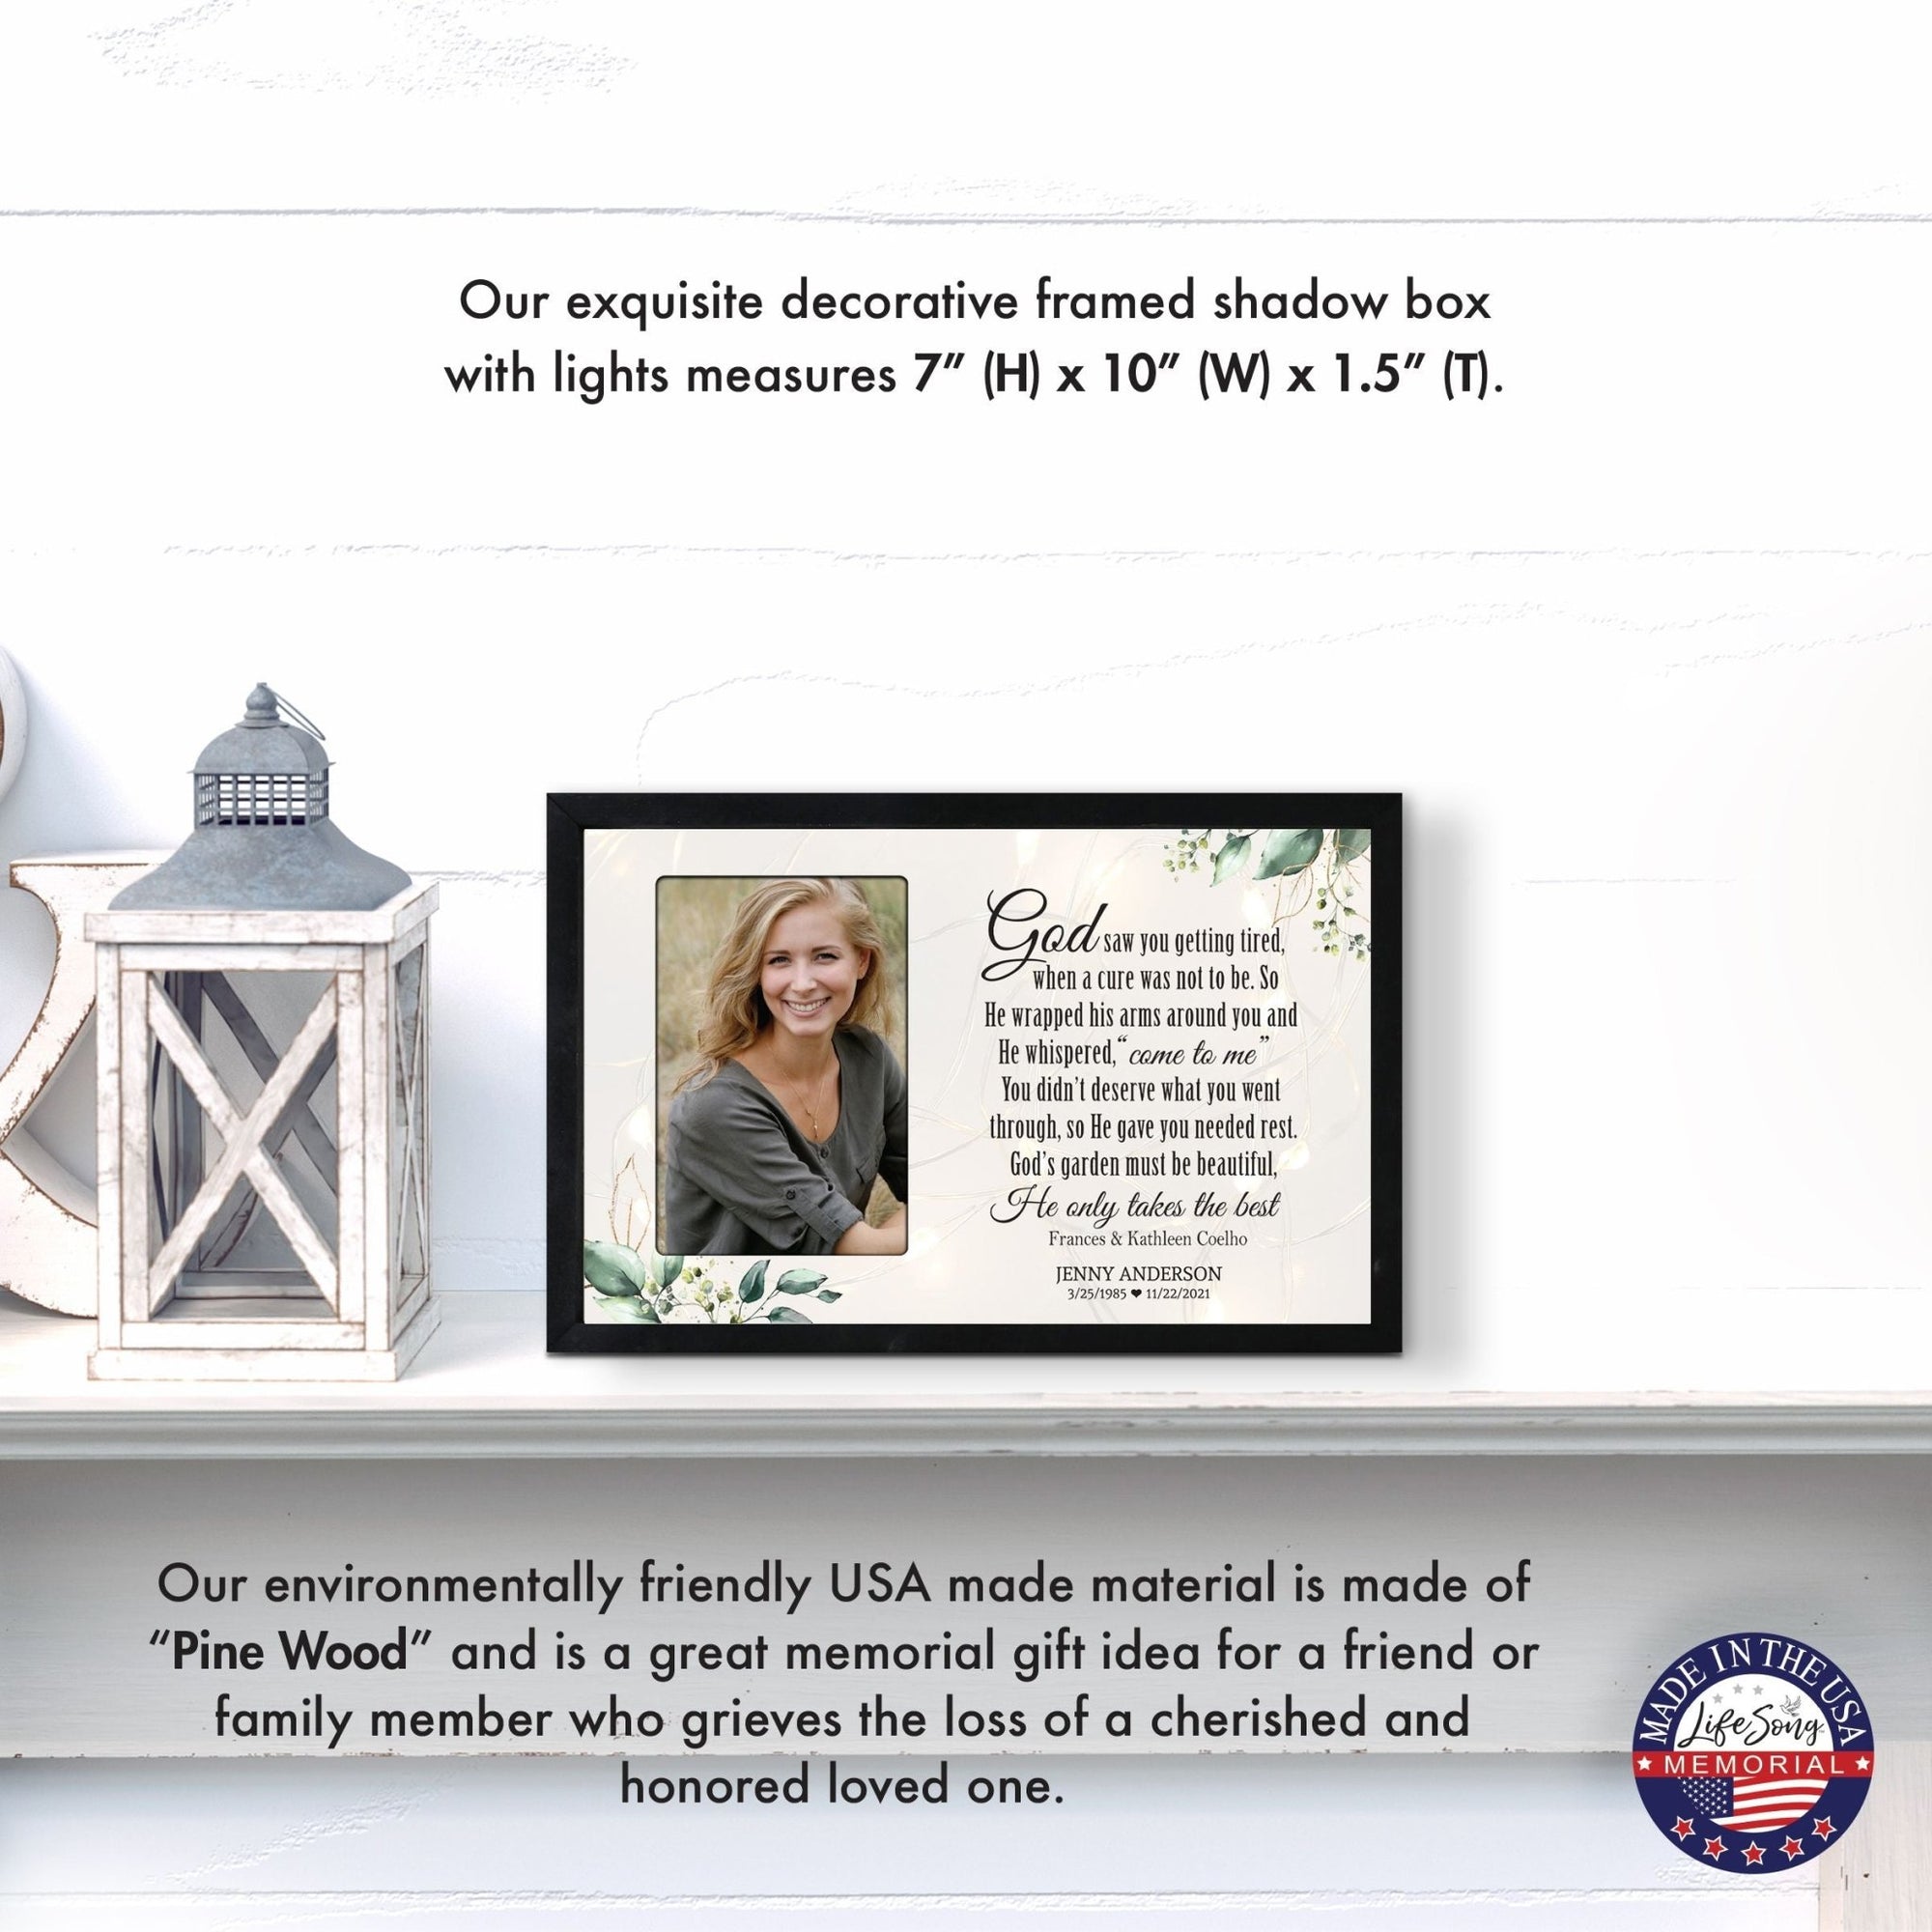 Personalized Memorial Black Framed Shadow Box With Lights Sympathy Gift Wall Décor - God Saw You Getting Tired - LifeSong Milestones